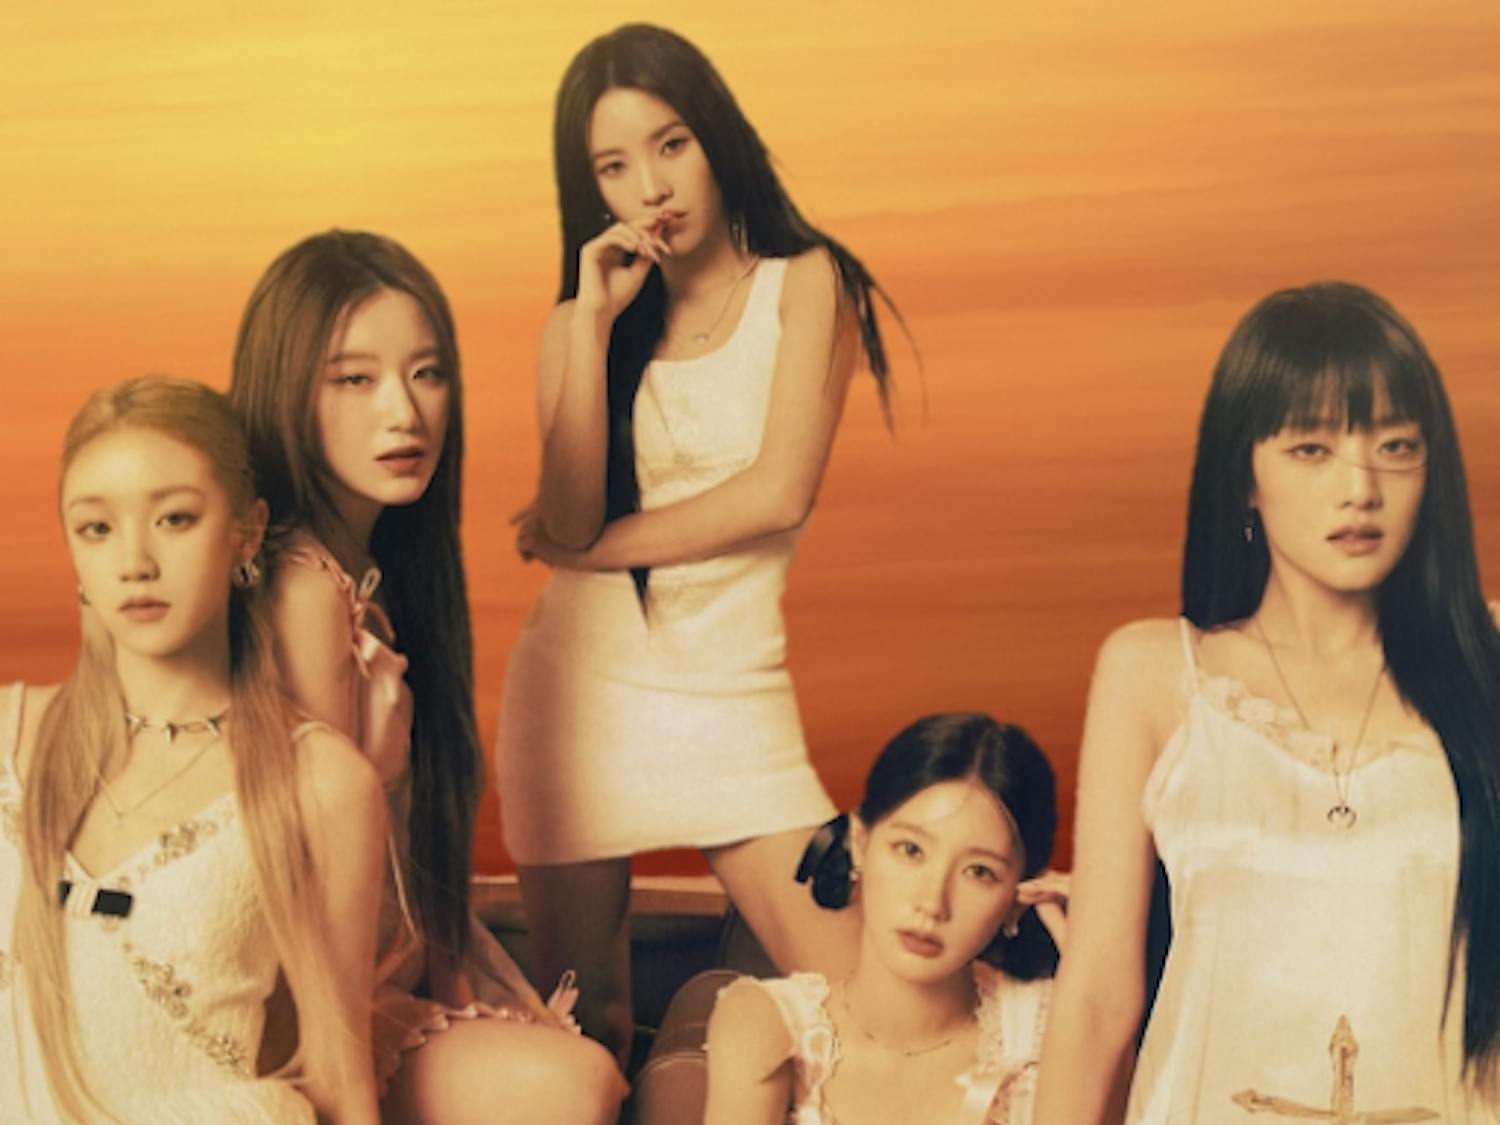 G-idle showcases their stunning vocals on their newest release, “HEAT” (Photo courtesy of Apple Music).